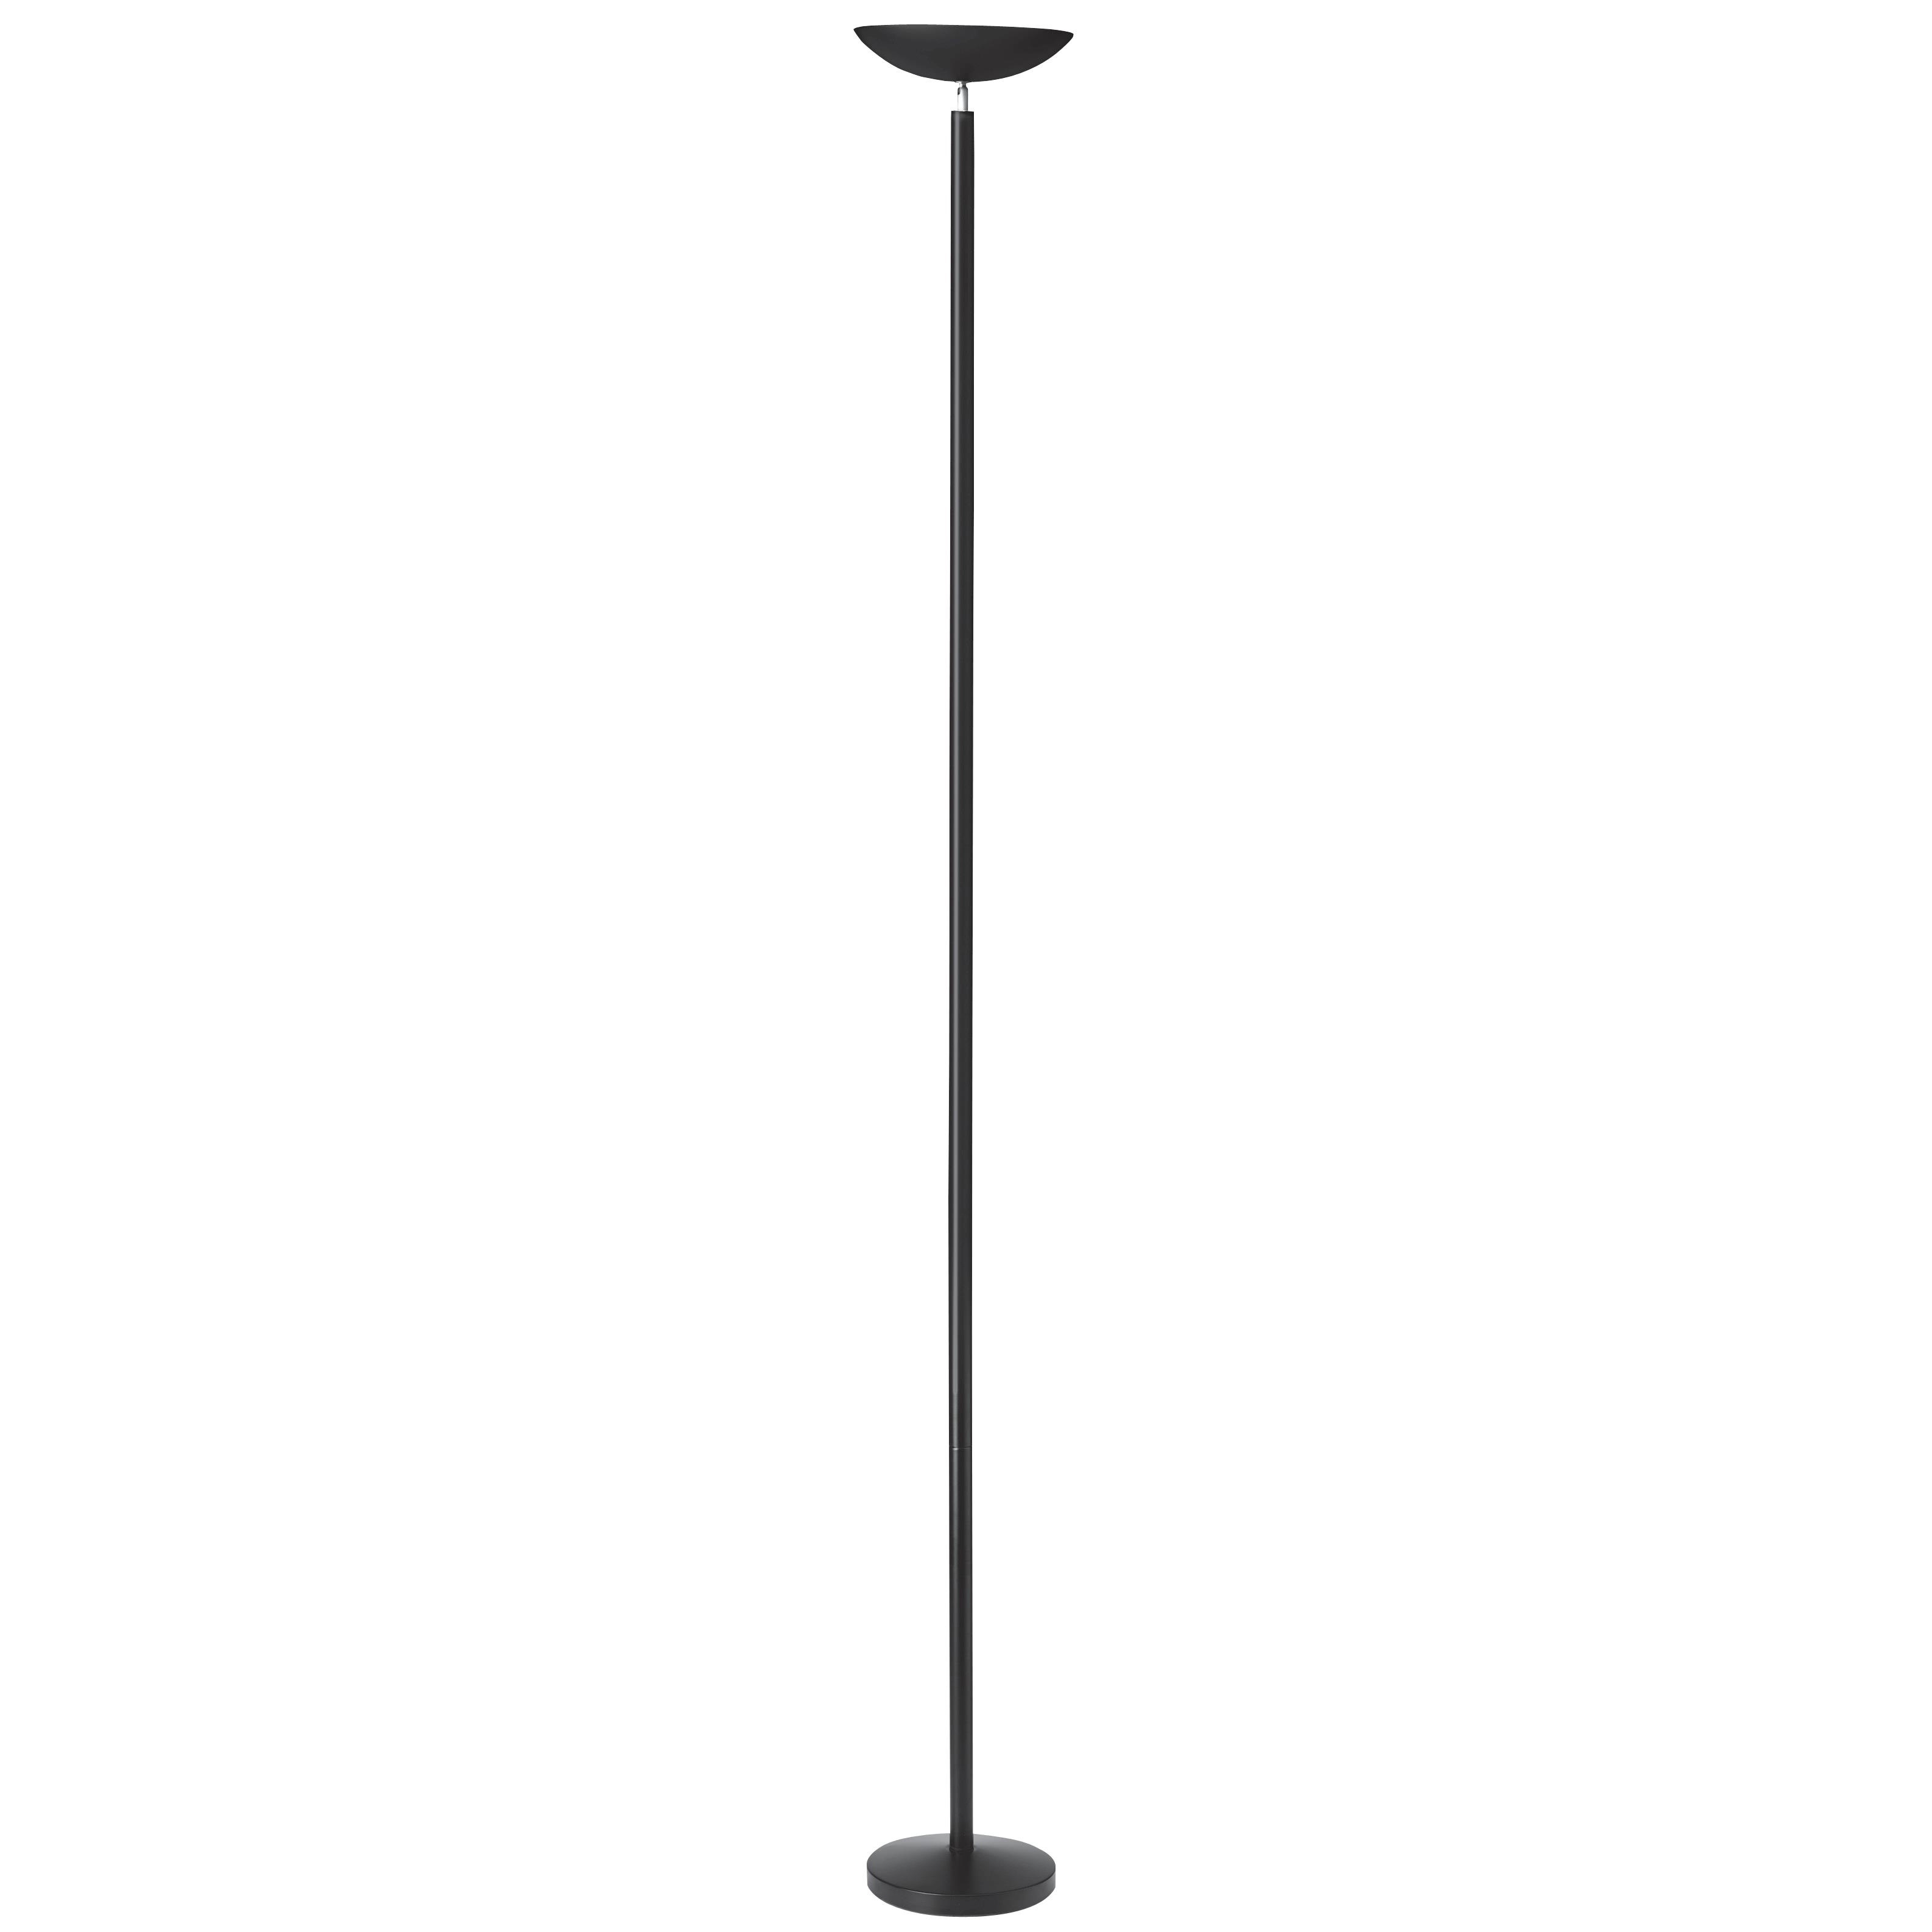 Unilux First Bowl Uplighter Floor Lamp 230w Height Of 1800mm throughout proportions 3172 X 3172